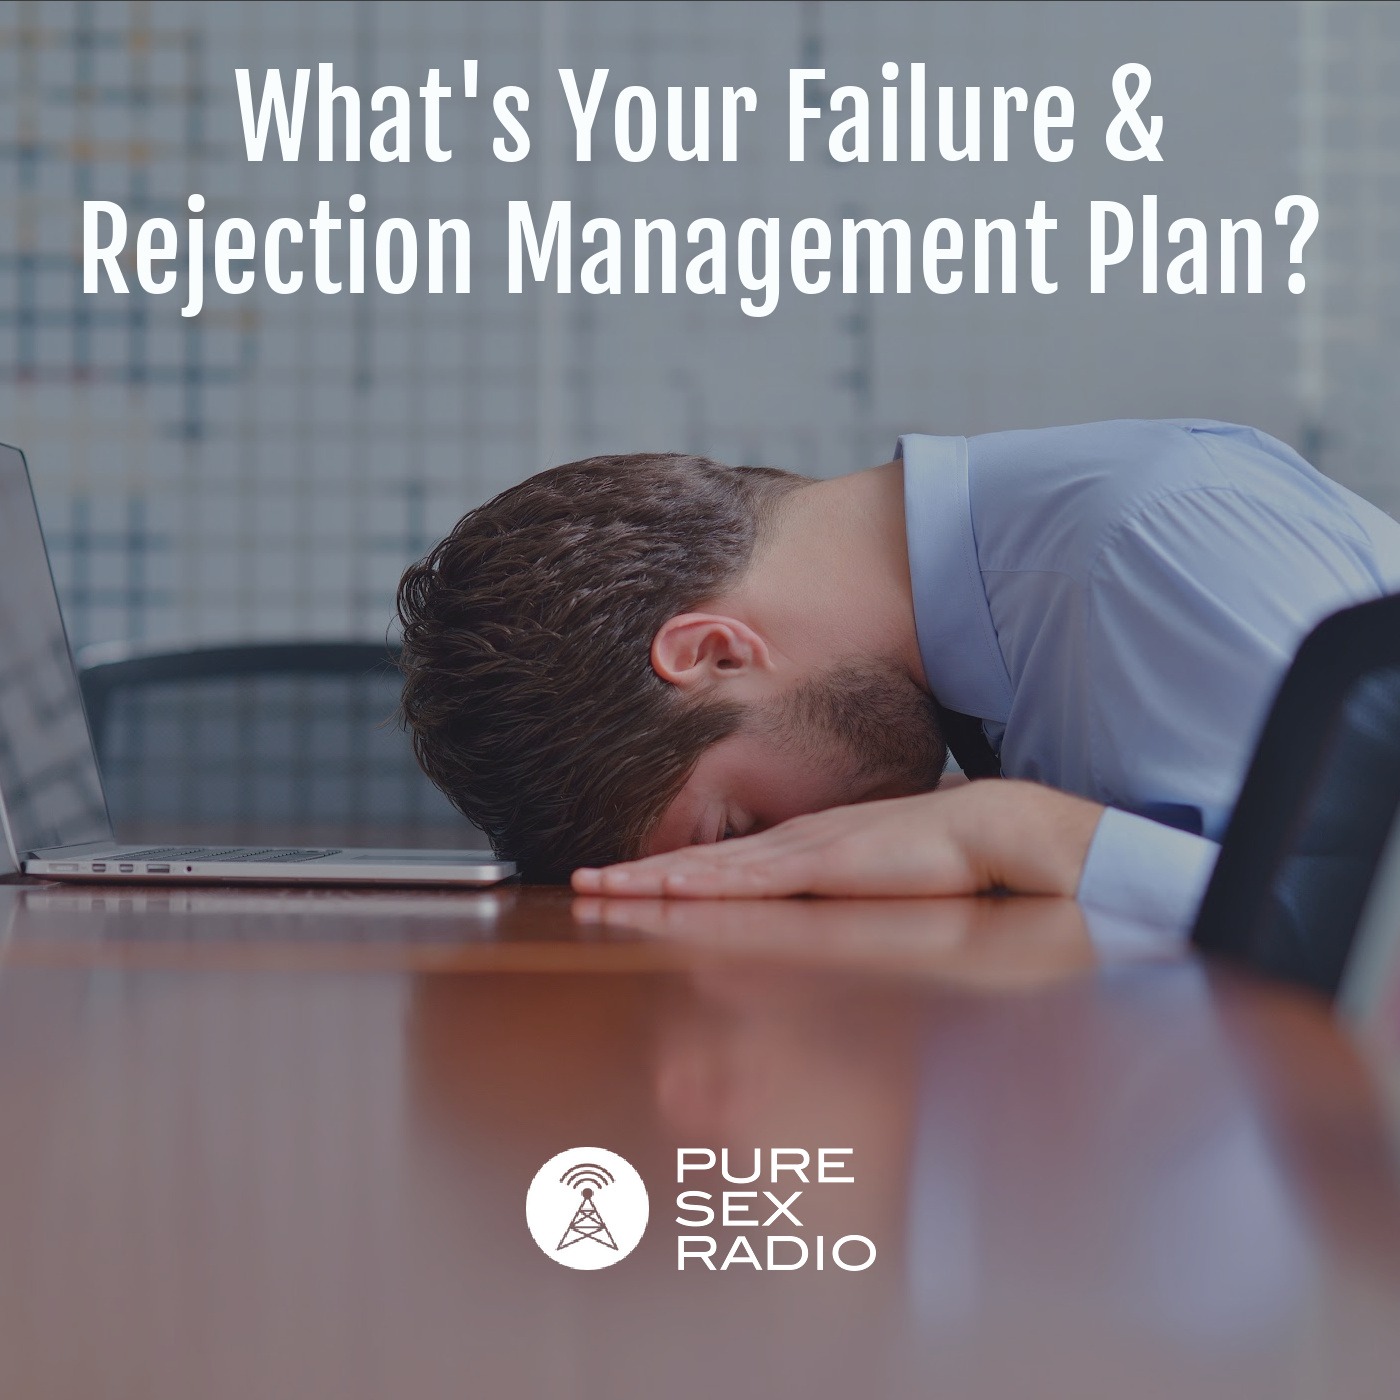 What's Your Failure and Rejection Management Plan?